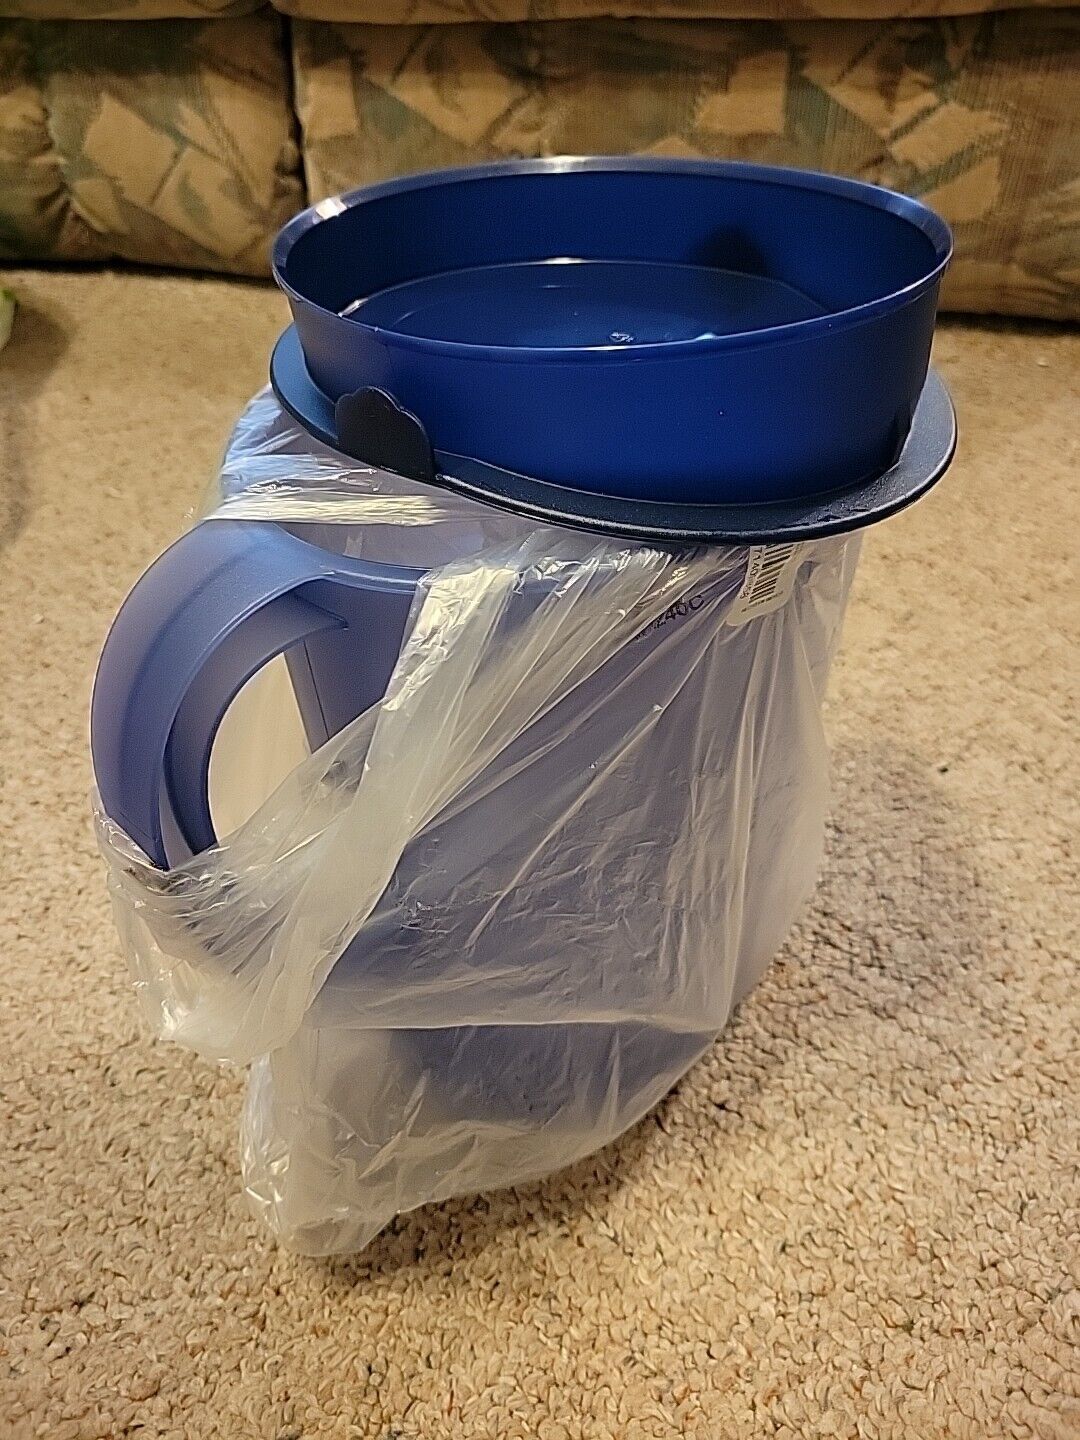 New Tupperware 1 Gal. Impressions Sheer Blue W/Navy Top pitcher